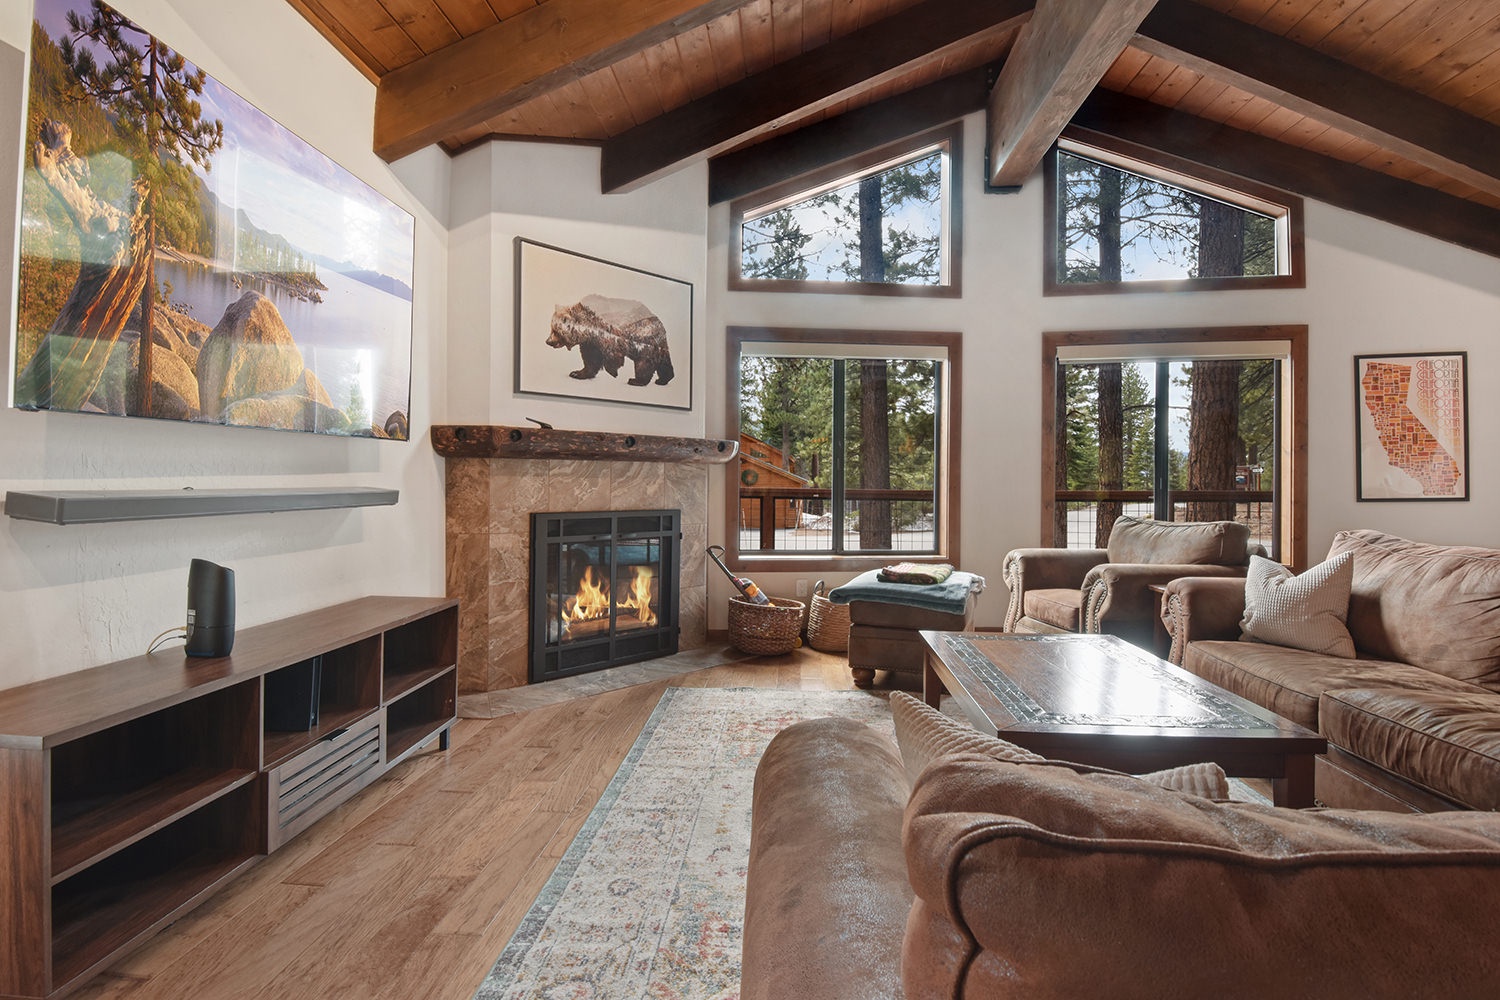 Open living space with TV, fireplace, and deck access